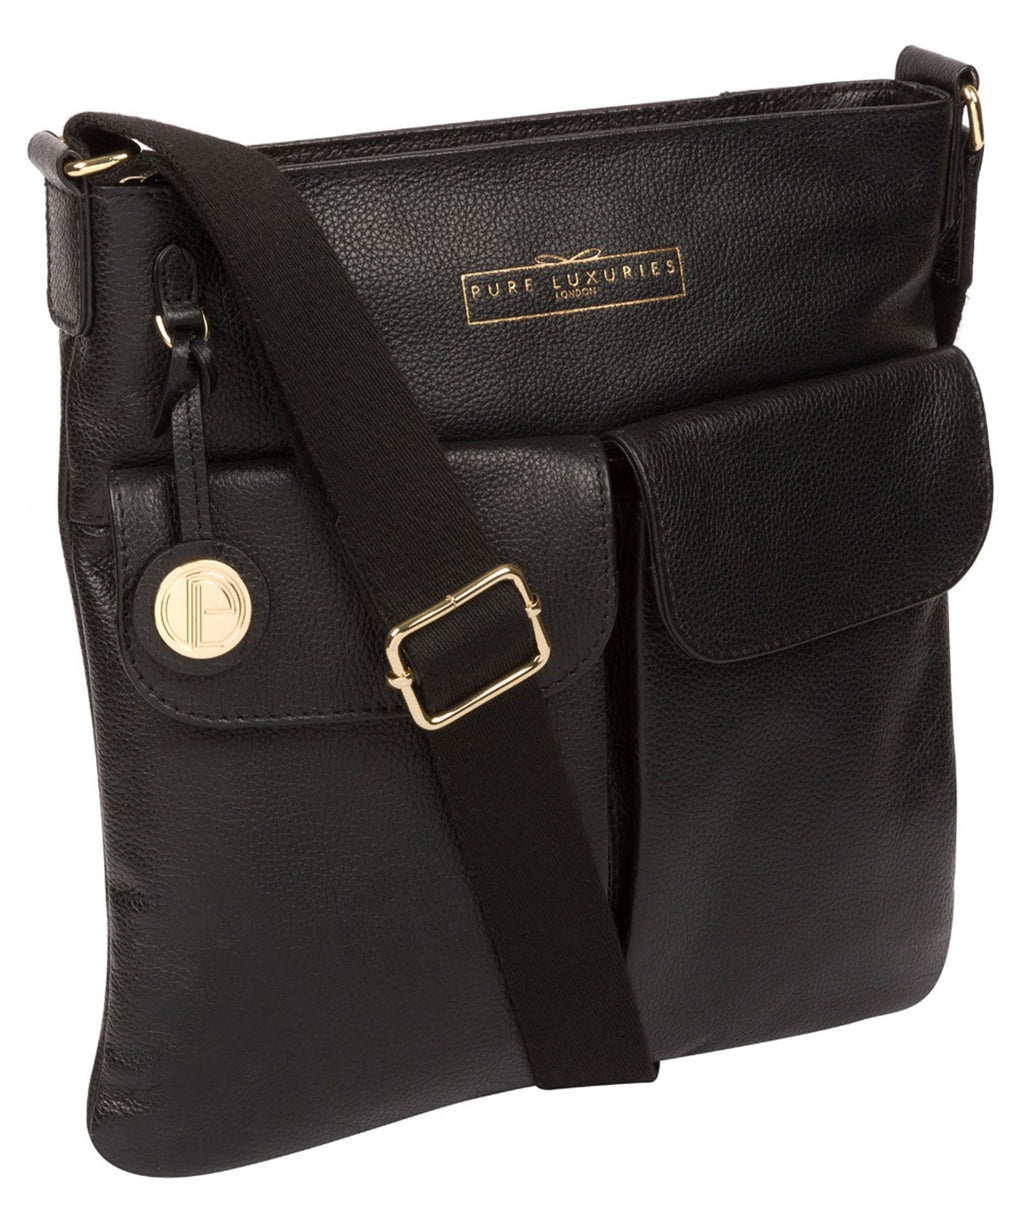 Black Leather Crossbody Bag 'Soames' by Pure Luxuries – Pure Luxuries ...